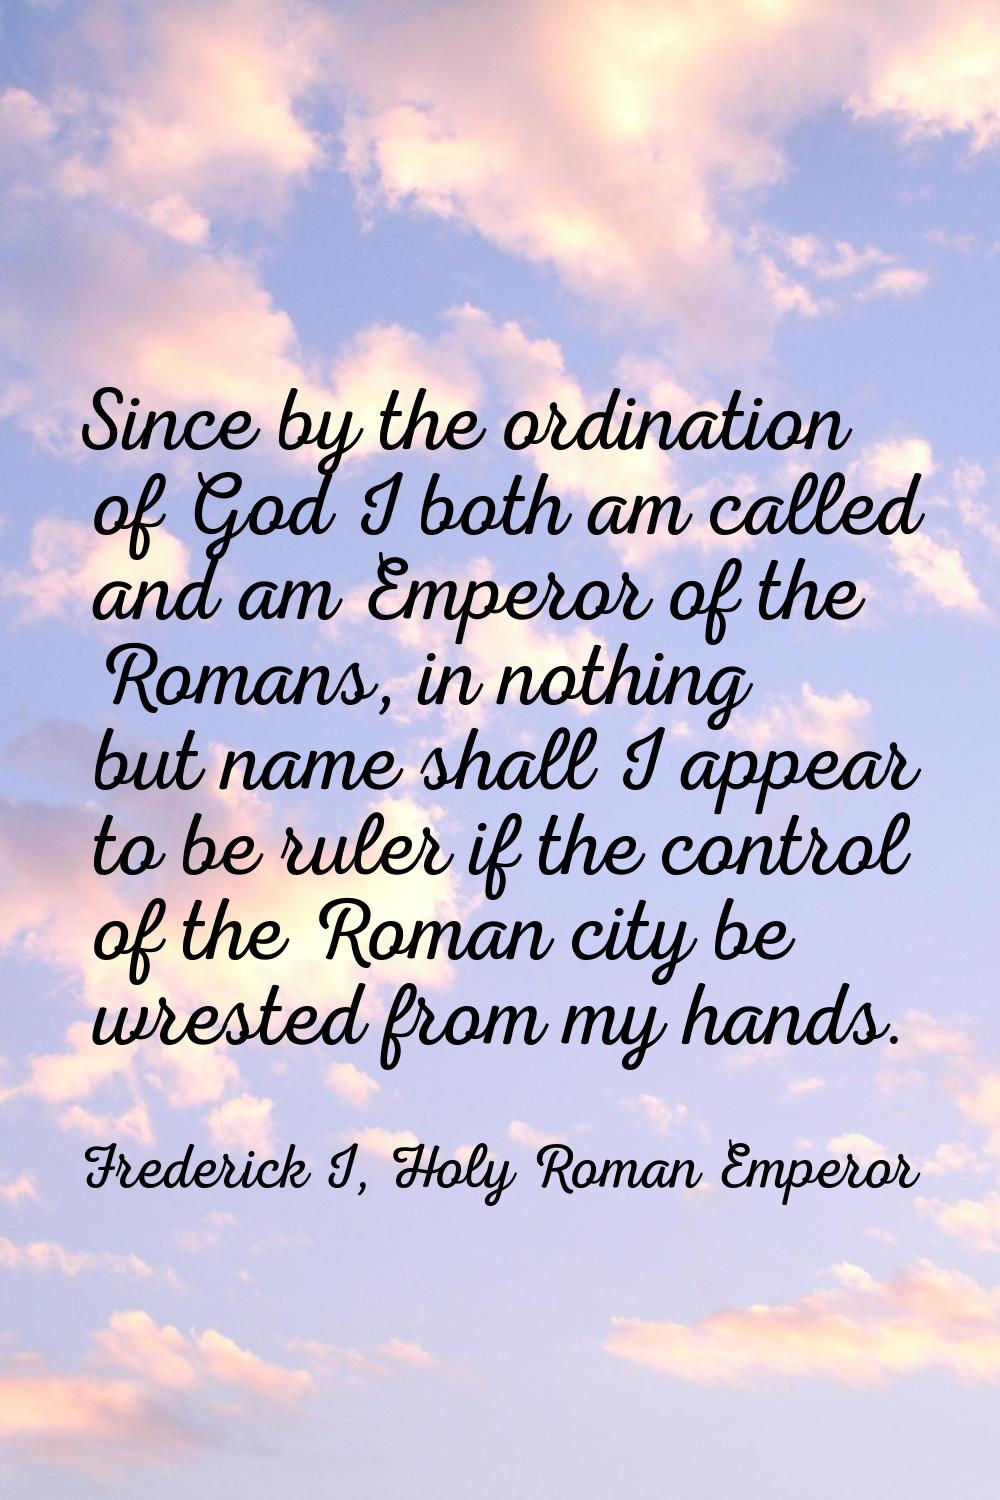 Since by the ordination of God I both am called and am Emperor of the Romans, in nothing but name s